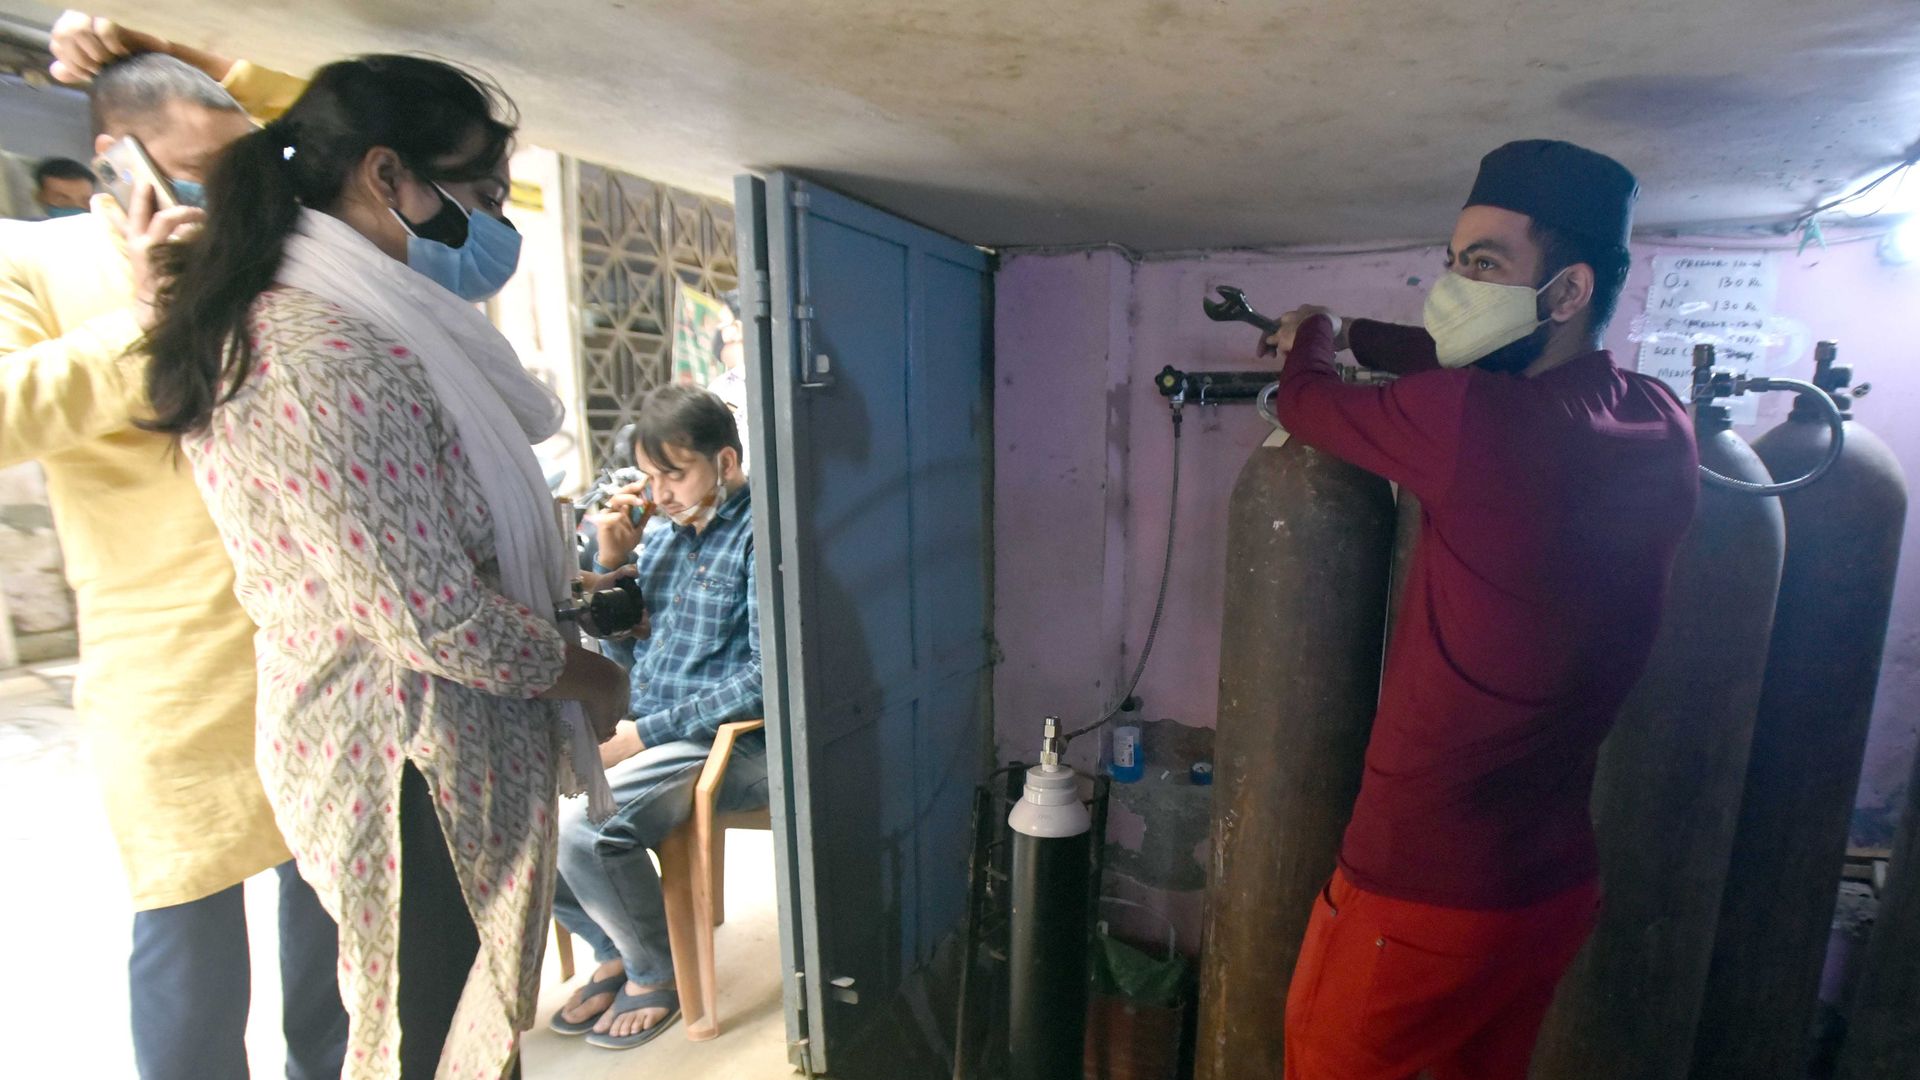 People filing the oxygen cylinders for housed patients at Shaheen Bagh on April 21, 2021 in New Delhi, India.